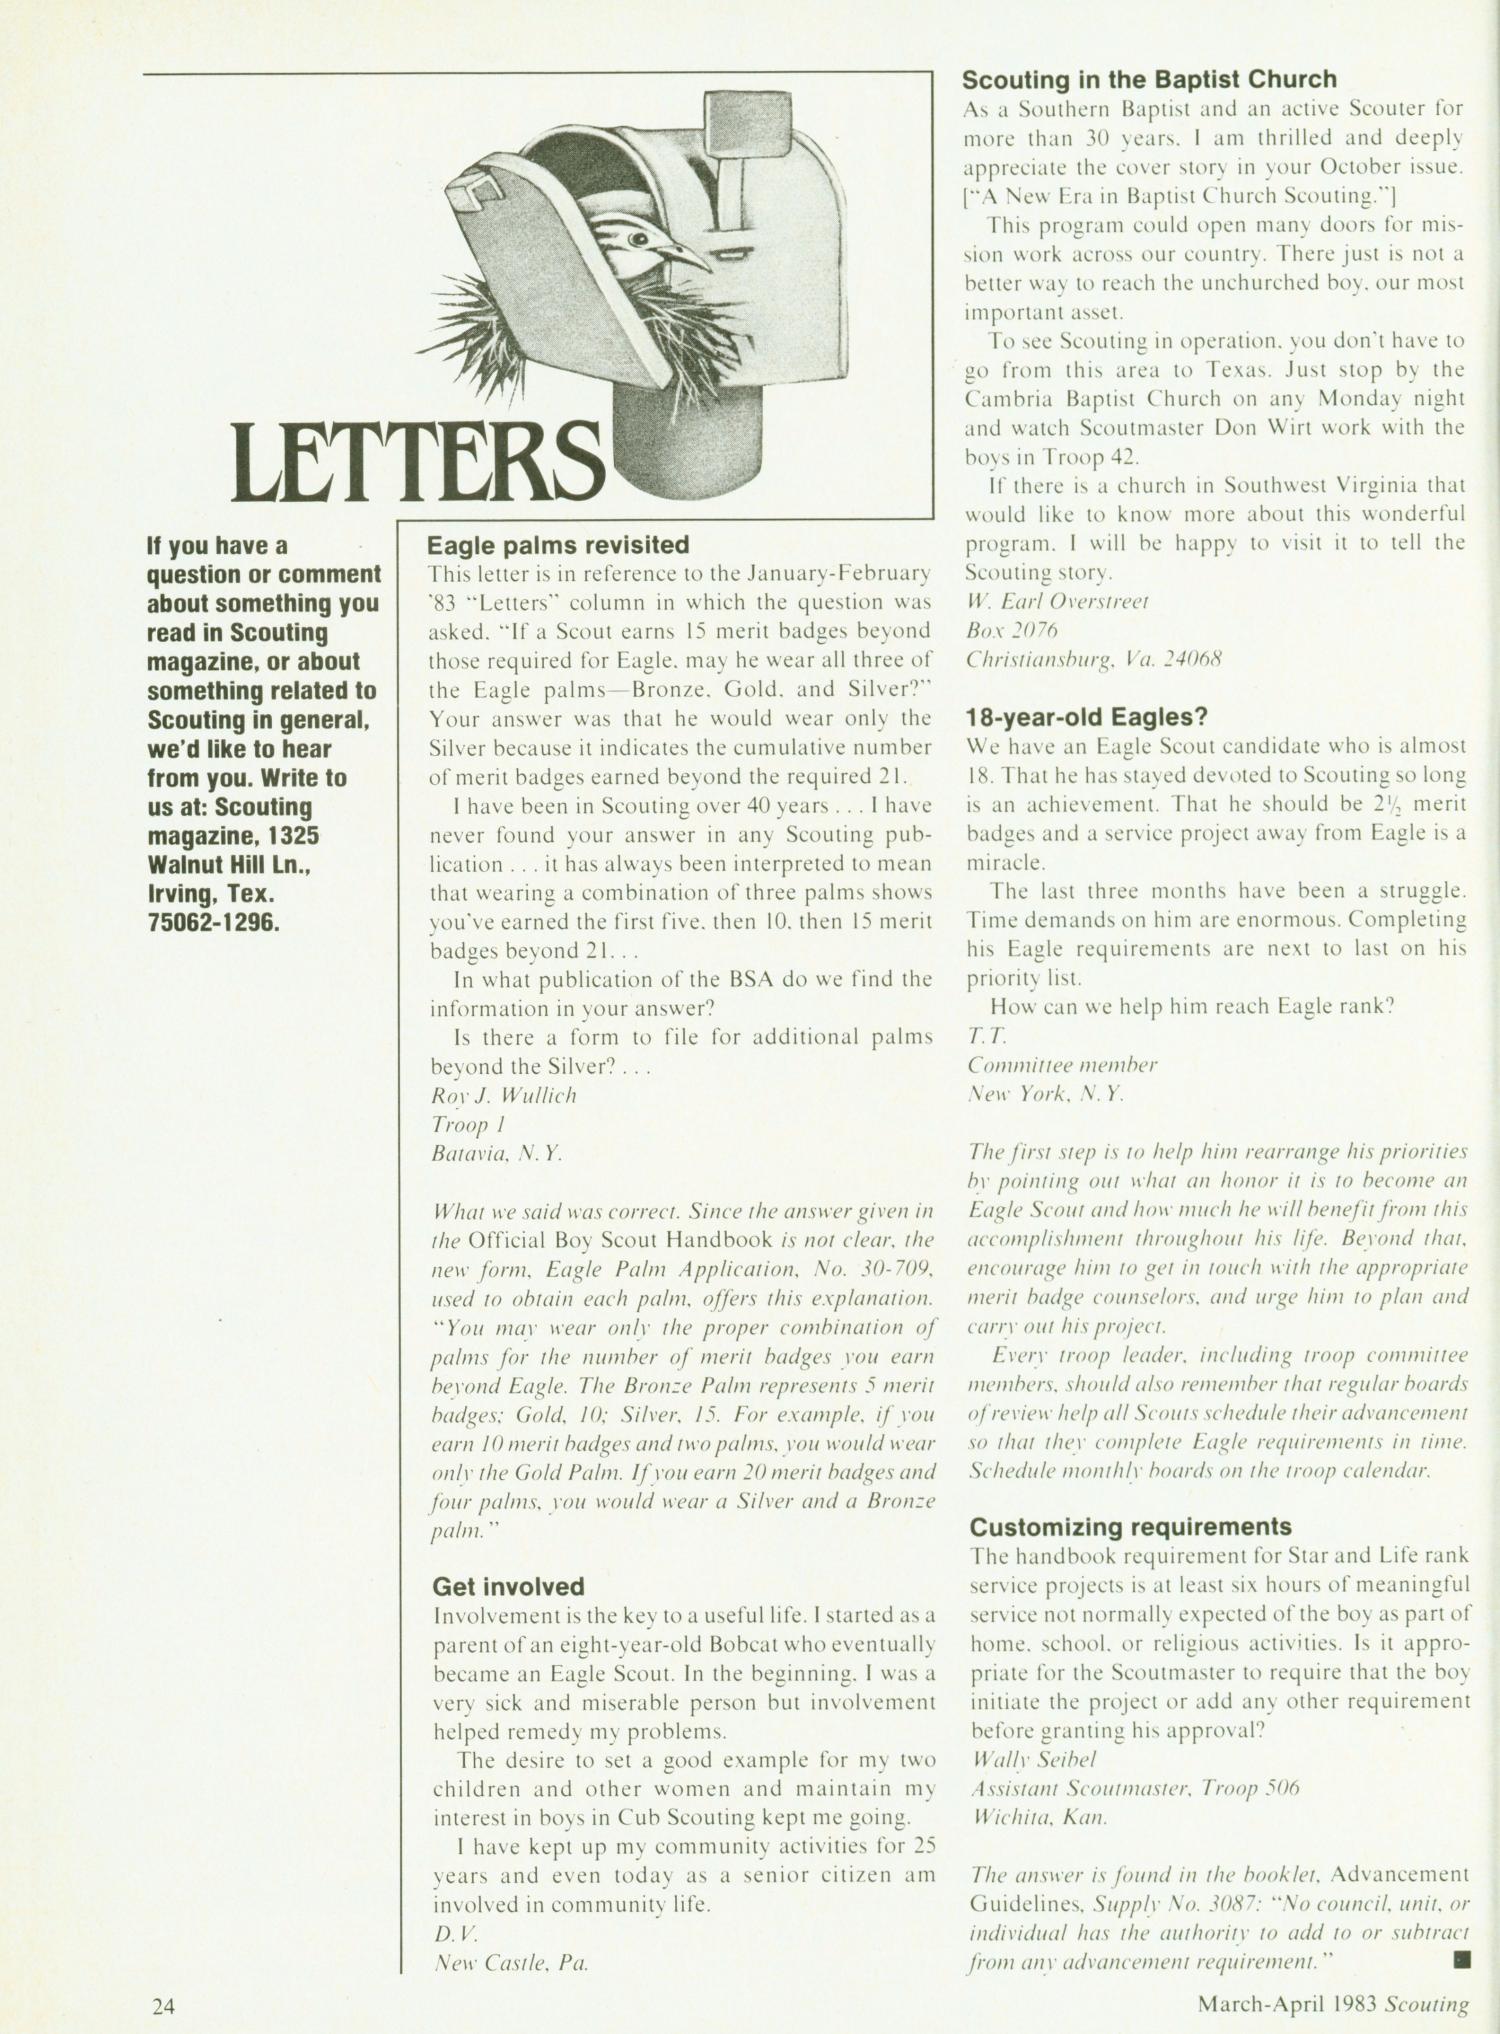 Scouting, Volume 71, Number 2, March-April 1983
                                                
                                                    24
                                                